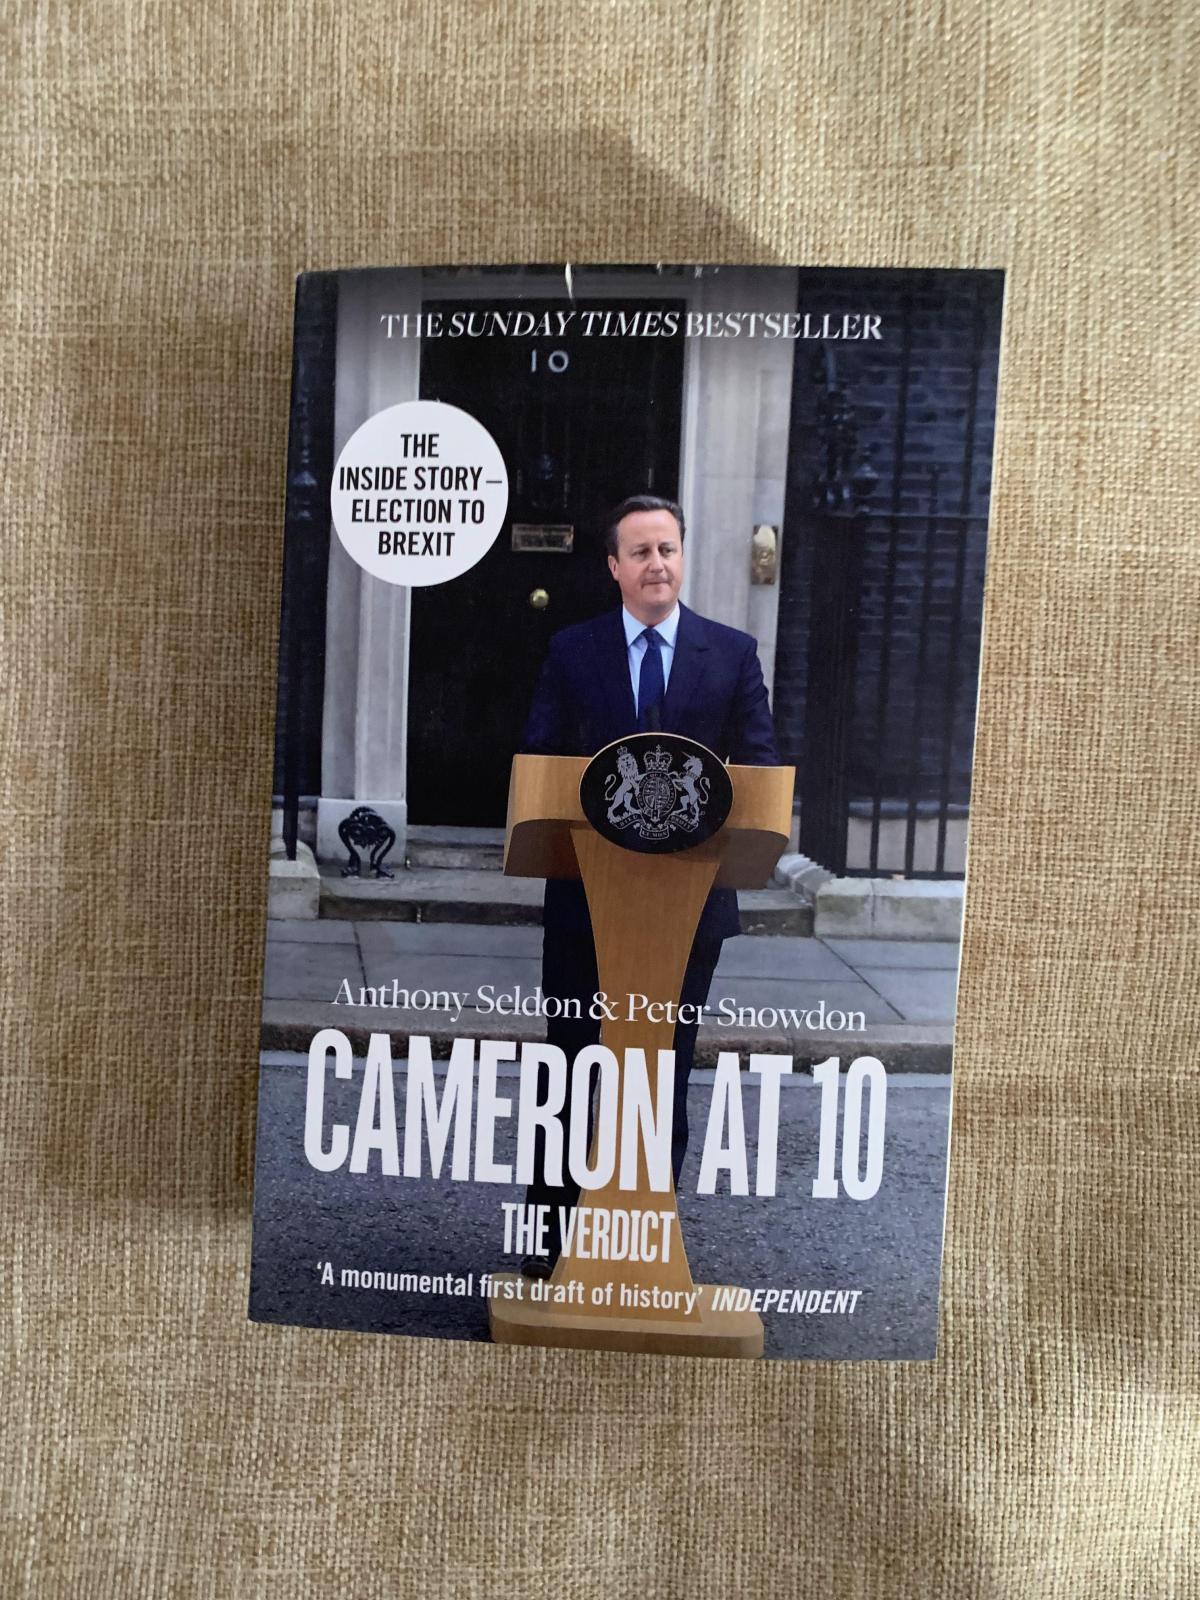 CAMERON AT 10: The Inside Story 2010–2015